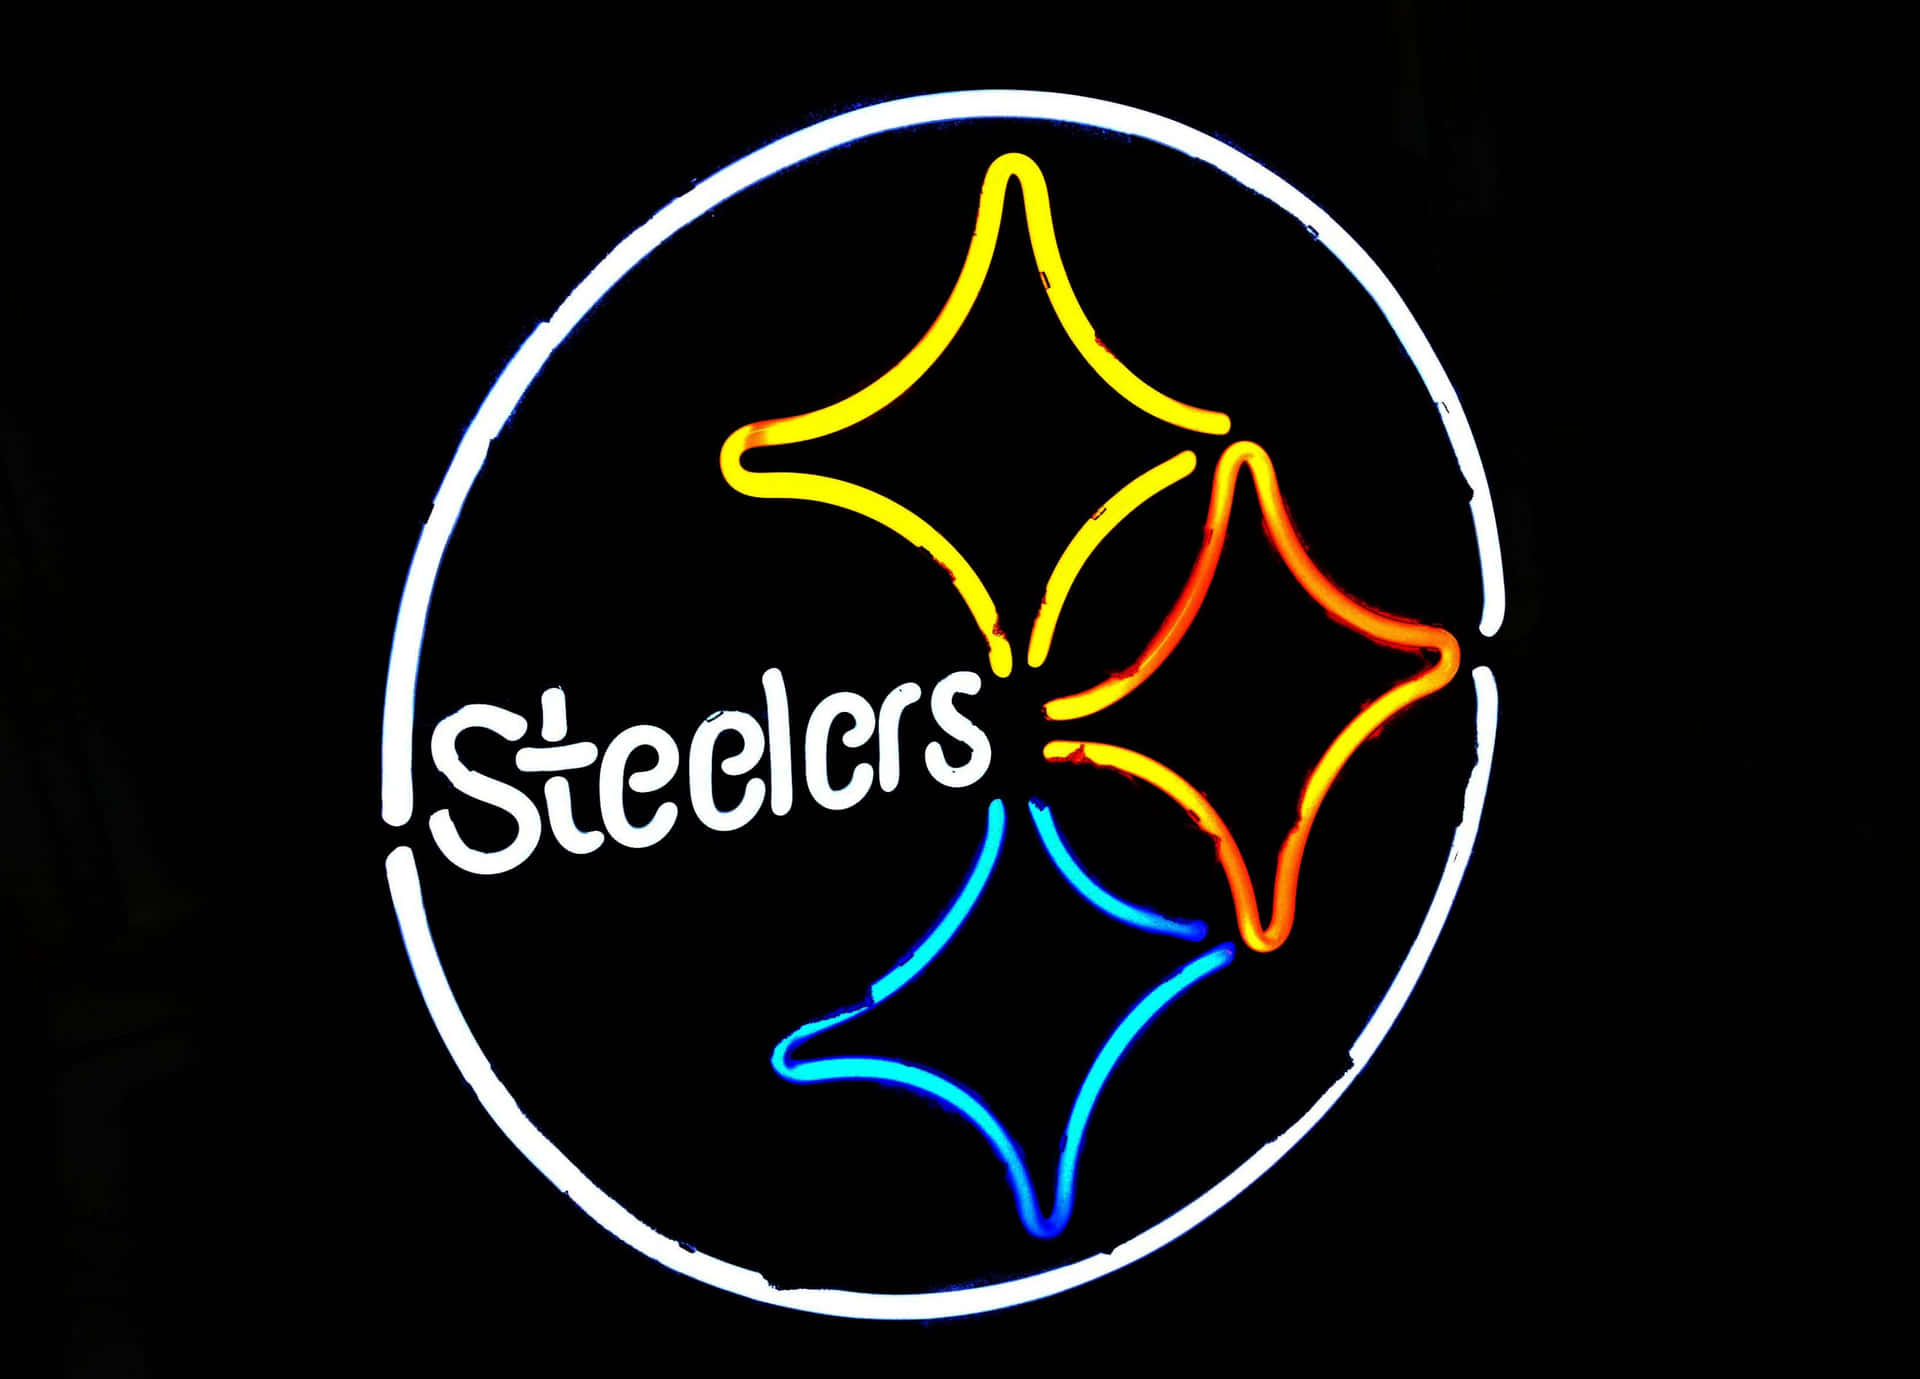 Pittsburgh Steelers Logo As Neon Sign Wallpaper